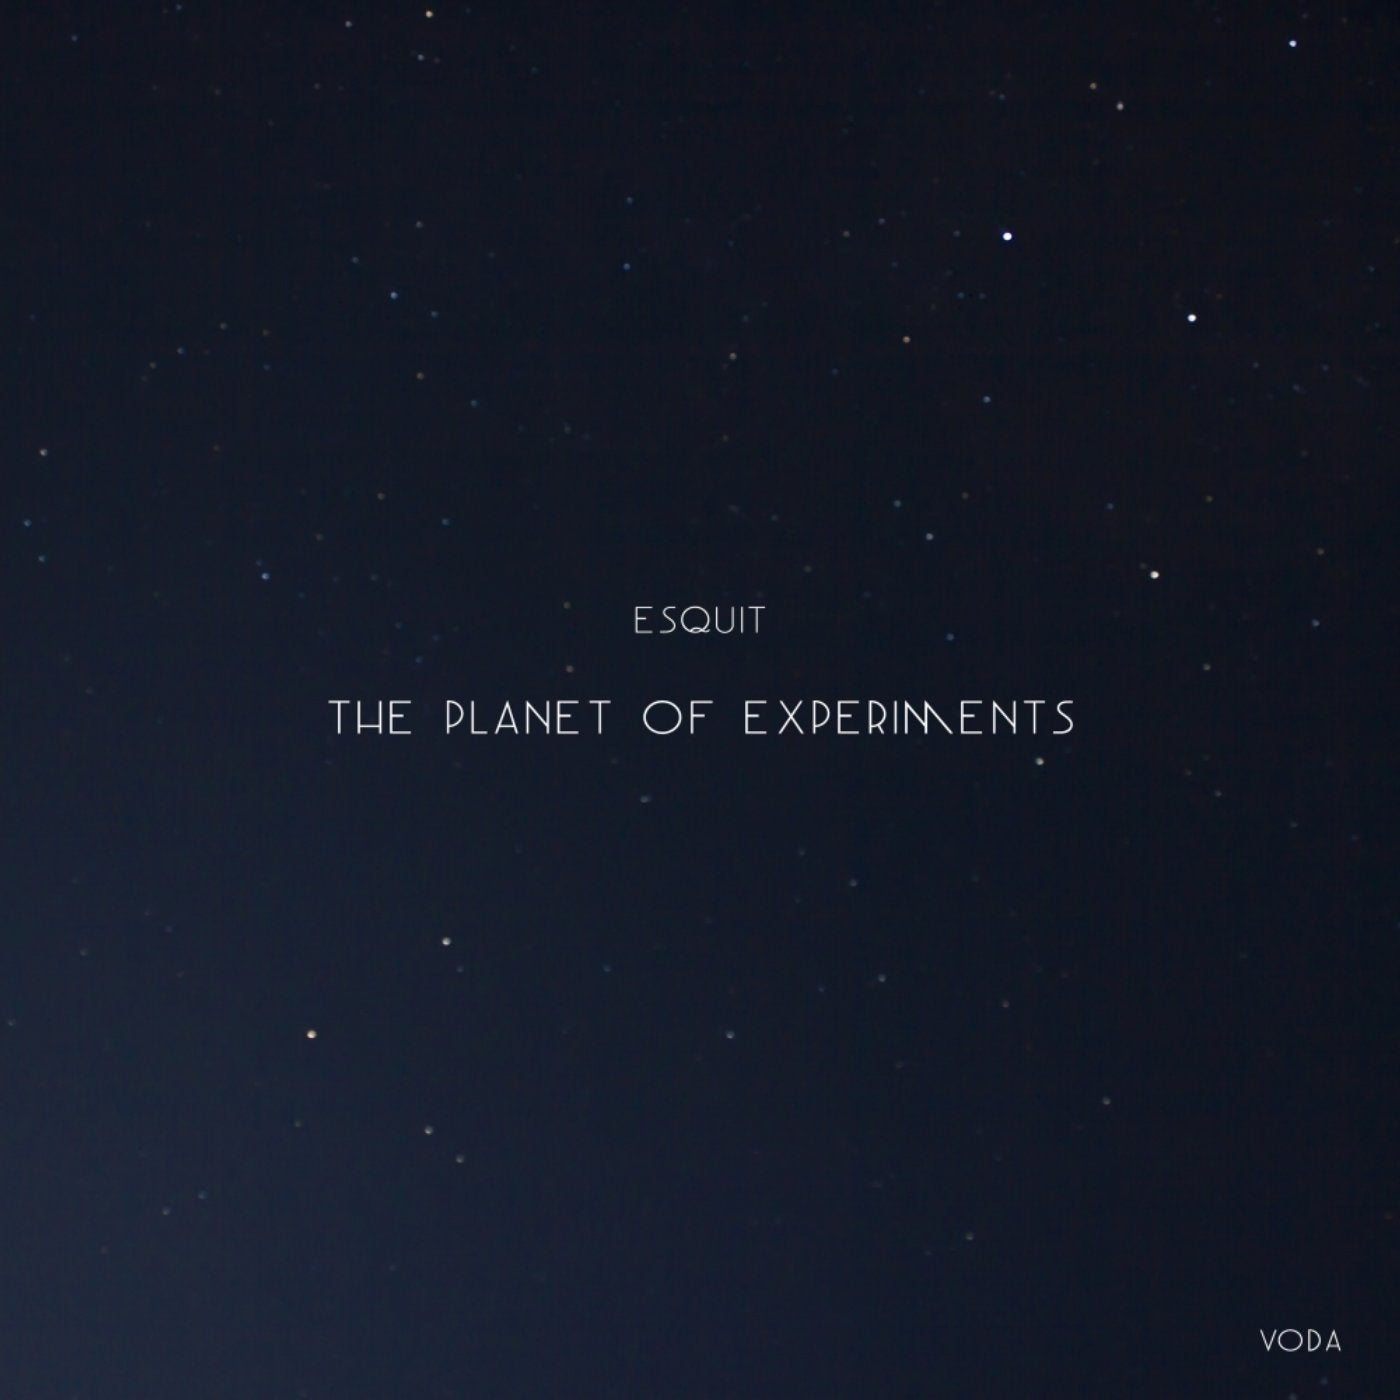 The Planet of Experiments